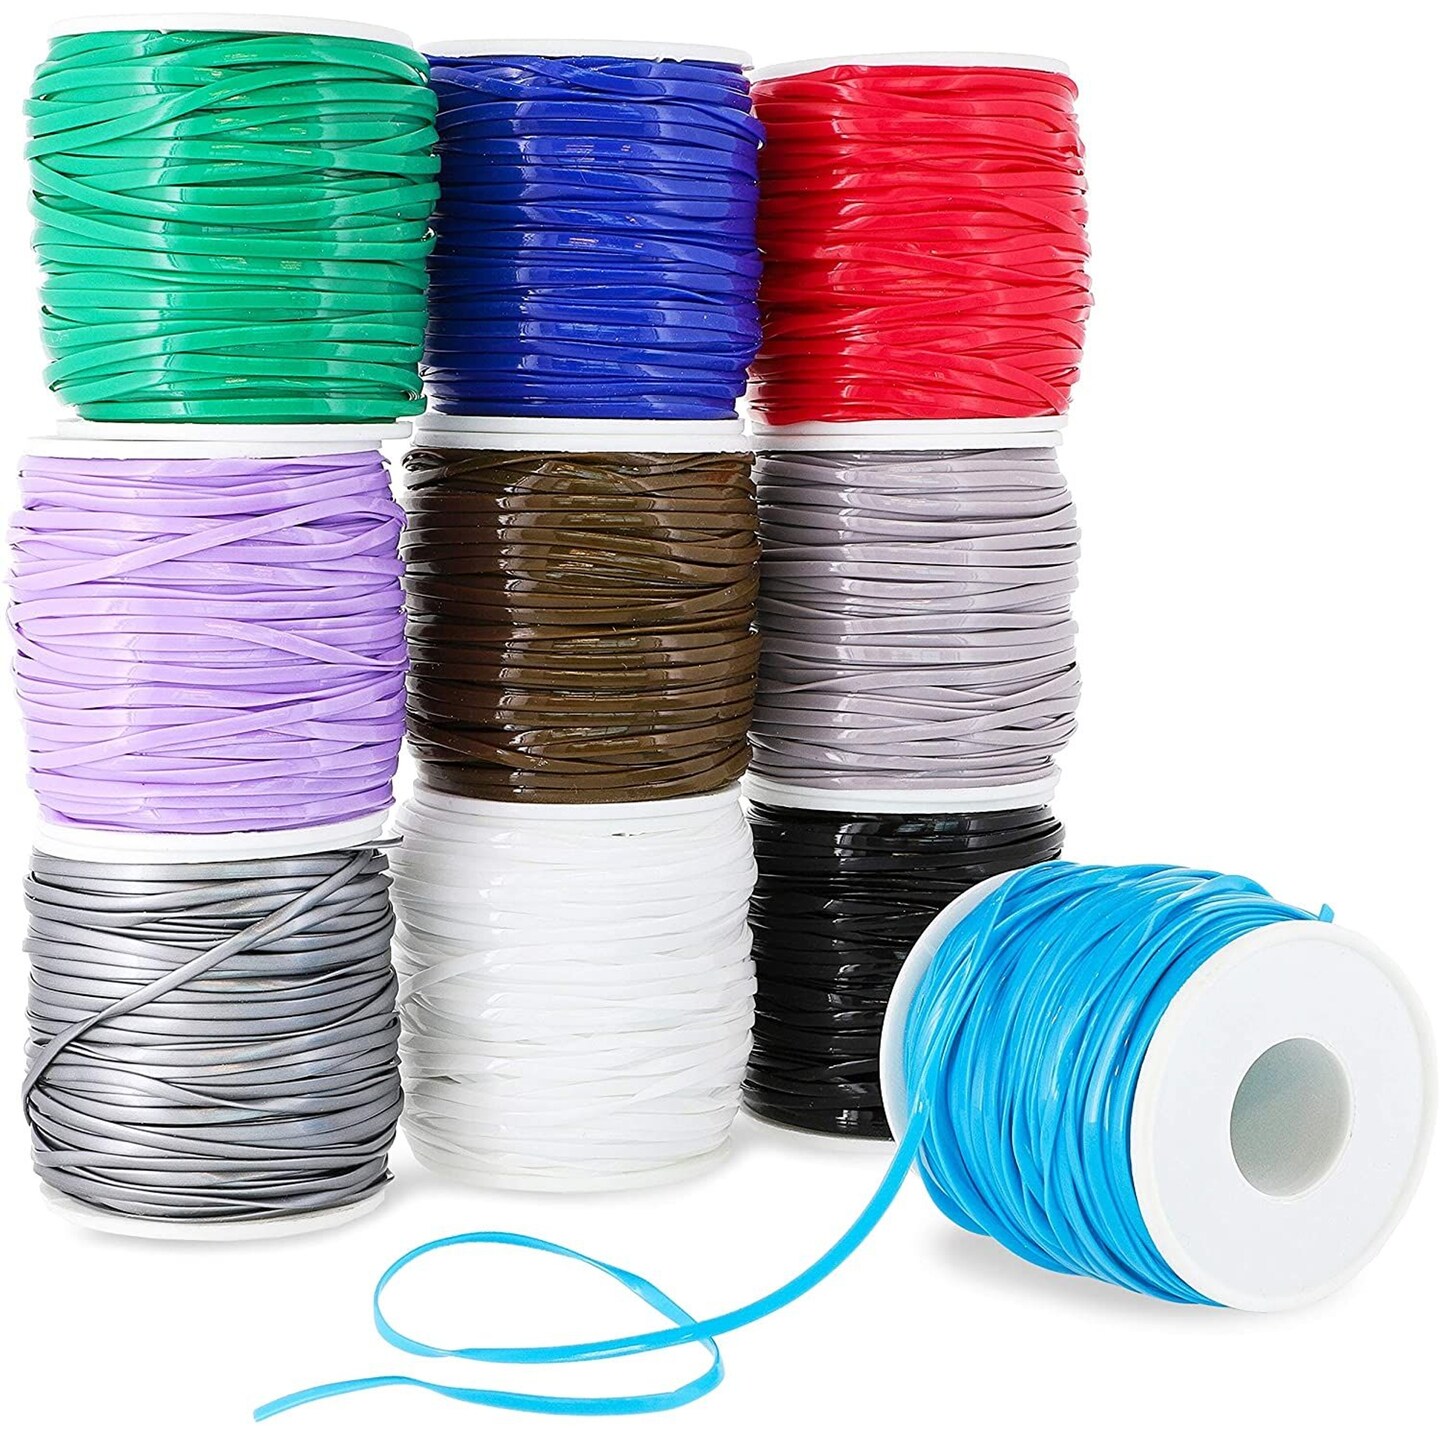 Plastic Lacing Cord, Jewelry Making Supplies, 10 Vibrant Colors